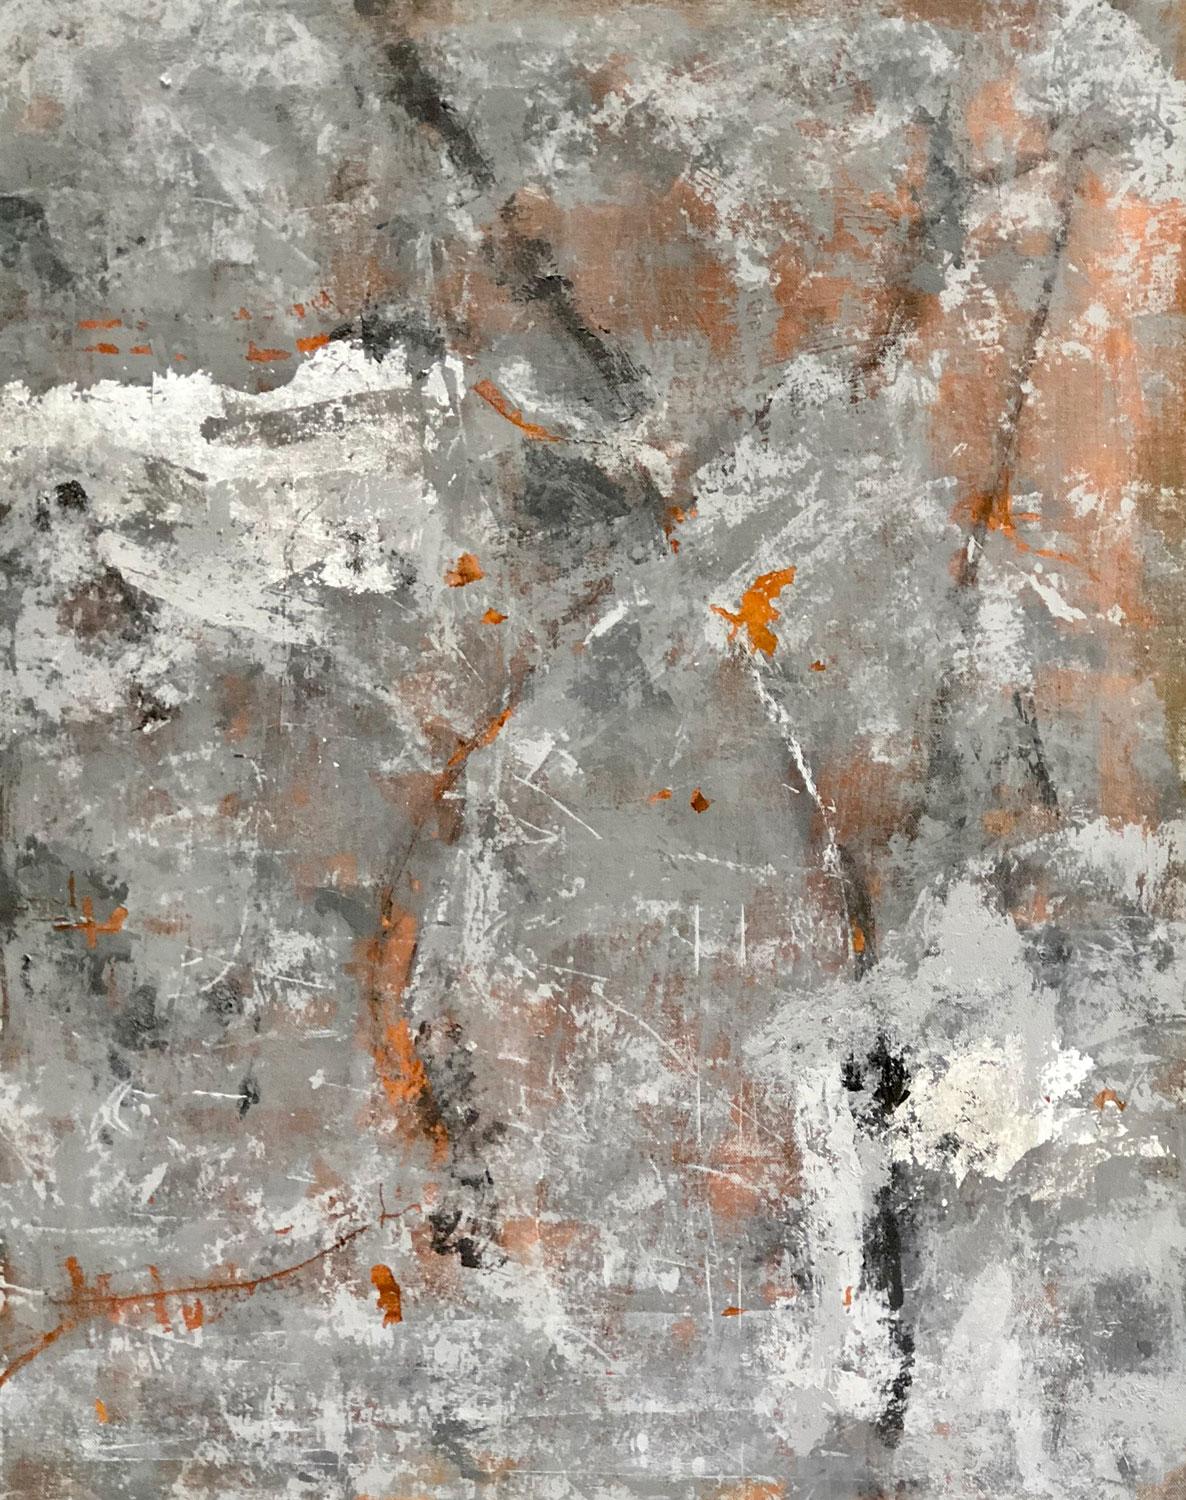 Arrangement in Silver and Gray, Abstract Painting - Mixed Media Art by Maya Malioutina